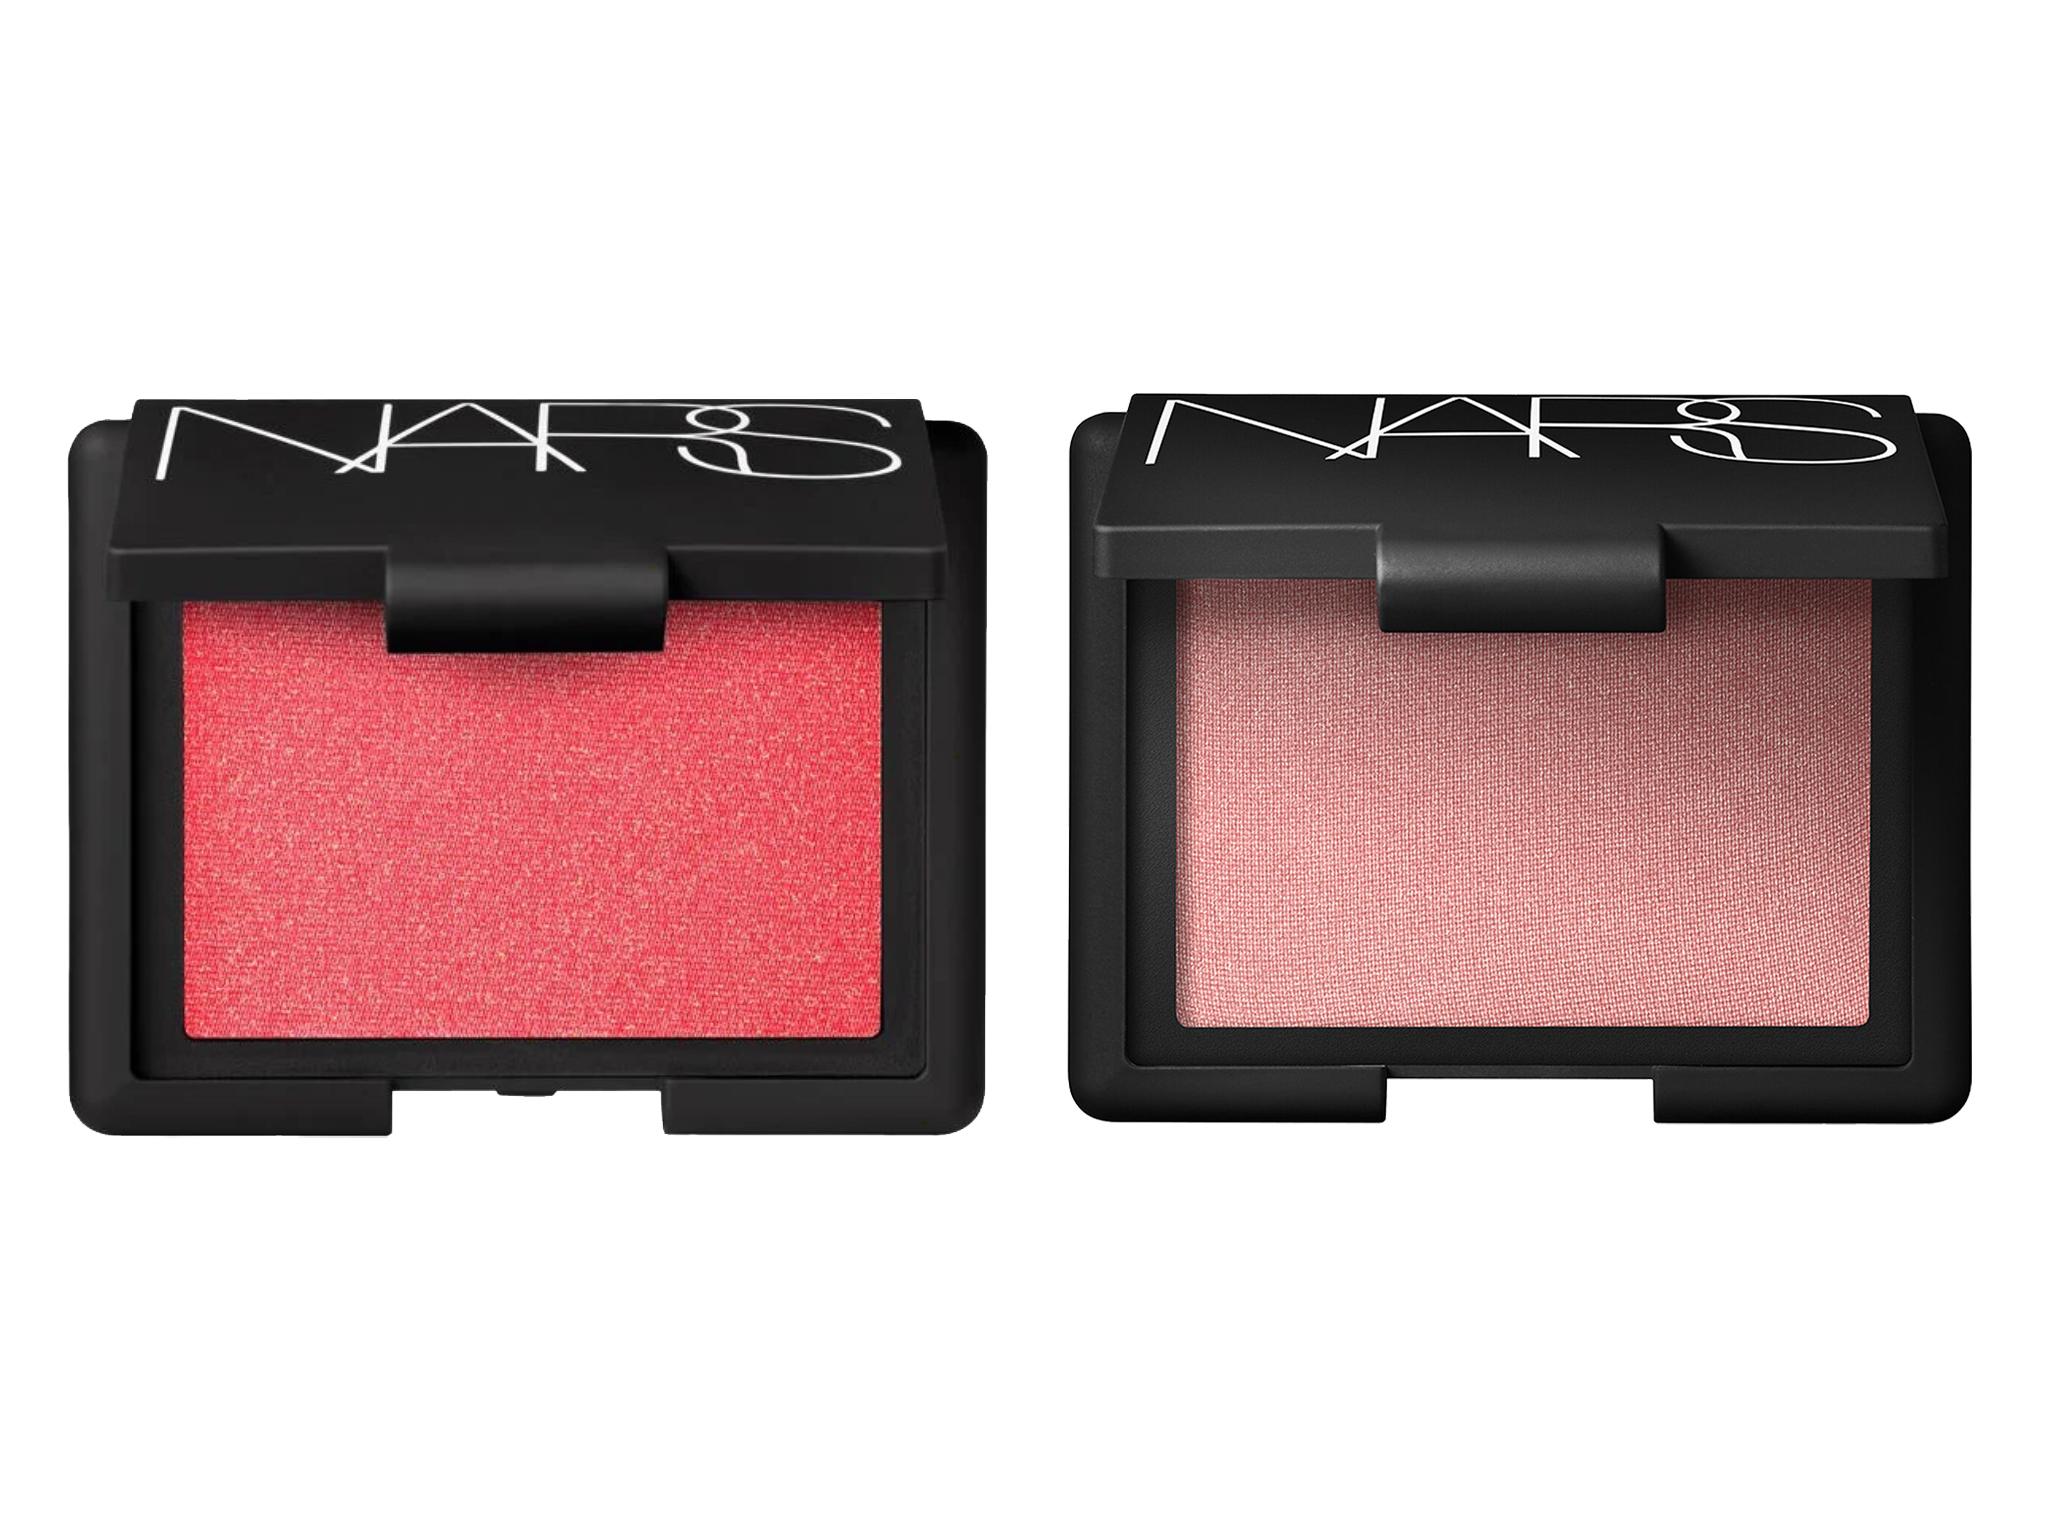 The new hot coral blush is an intensified version of the original (Nars)